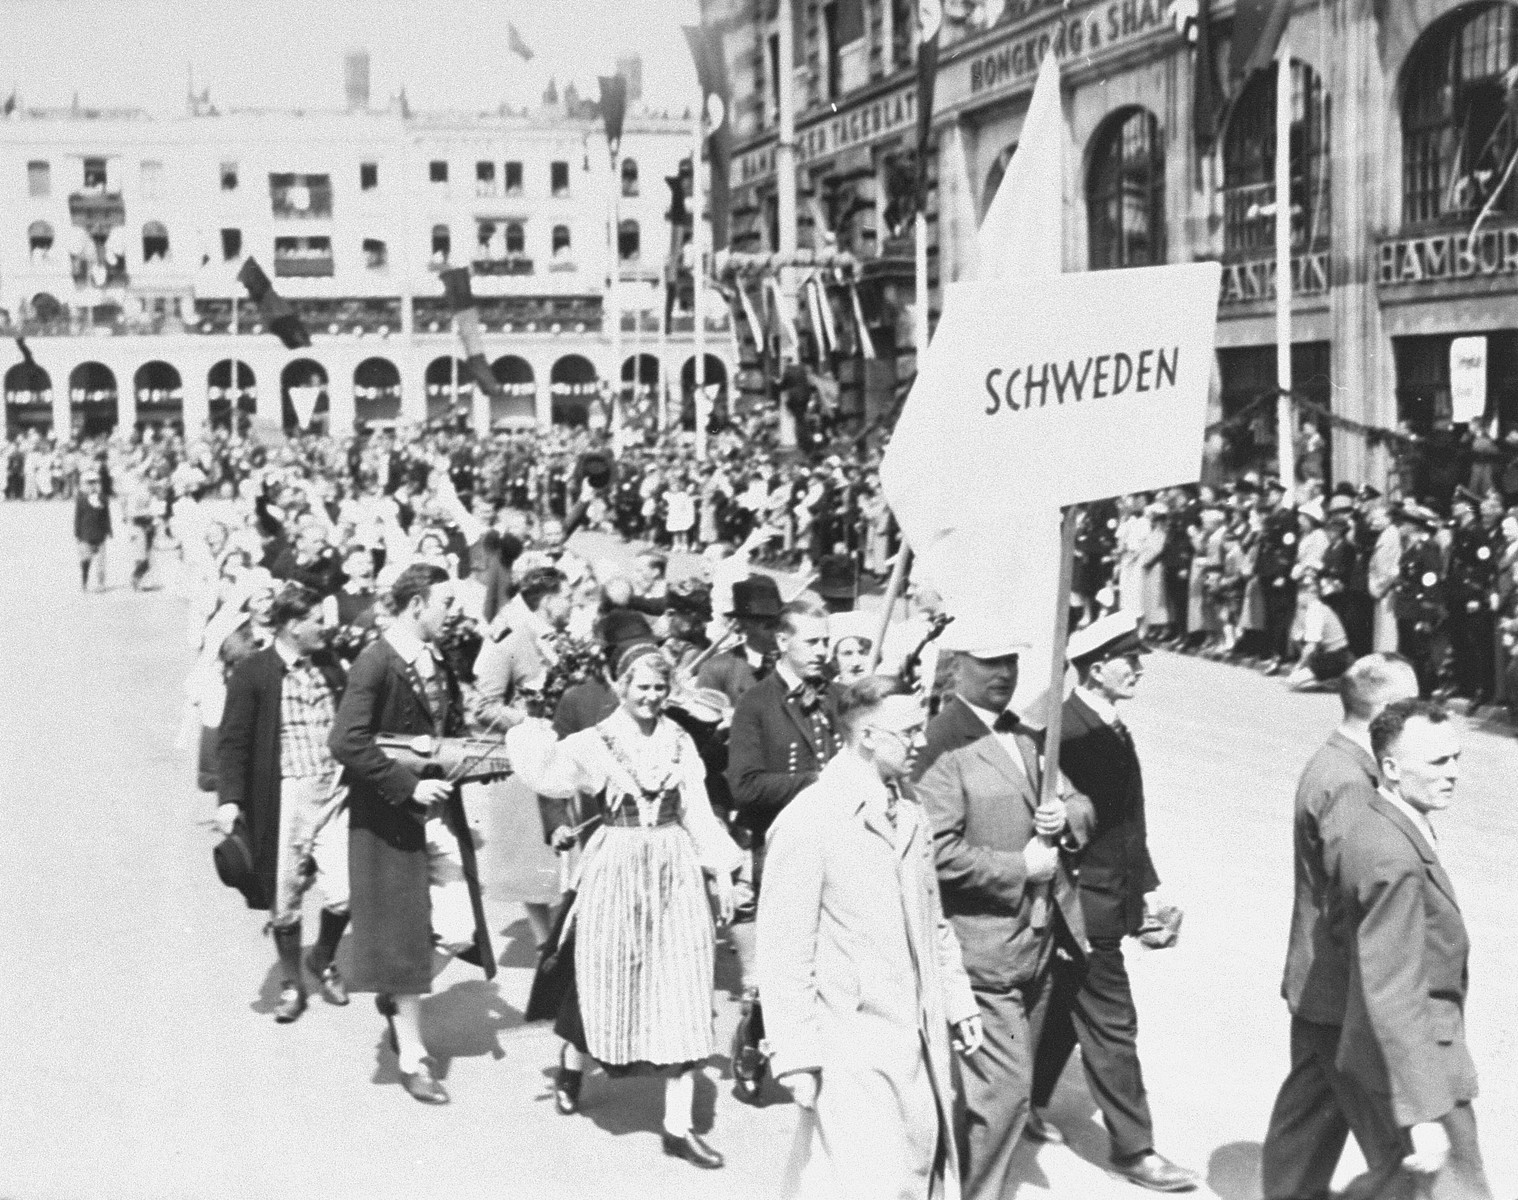 The arrival of the Swedish Olympic team in Germany.